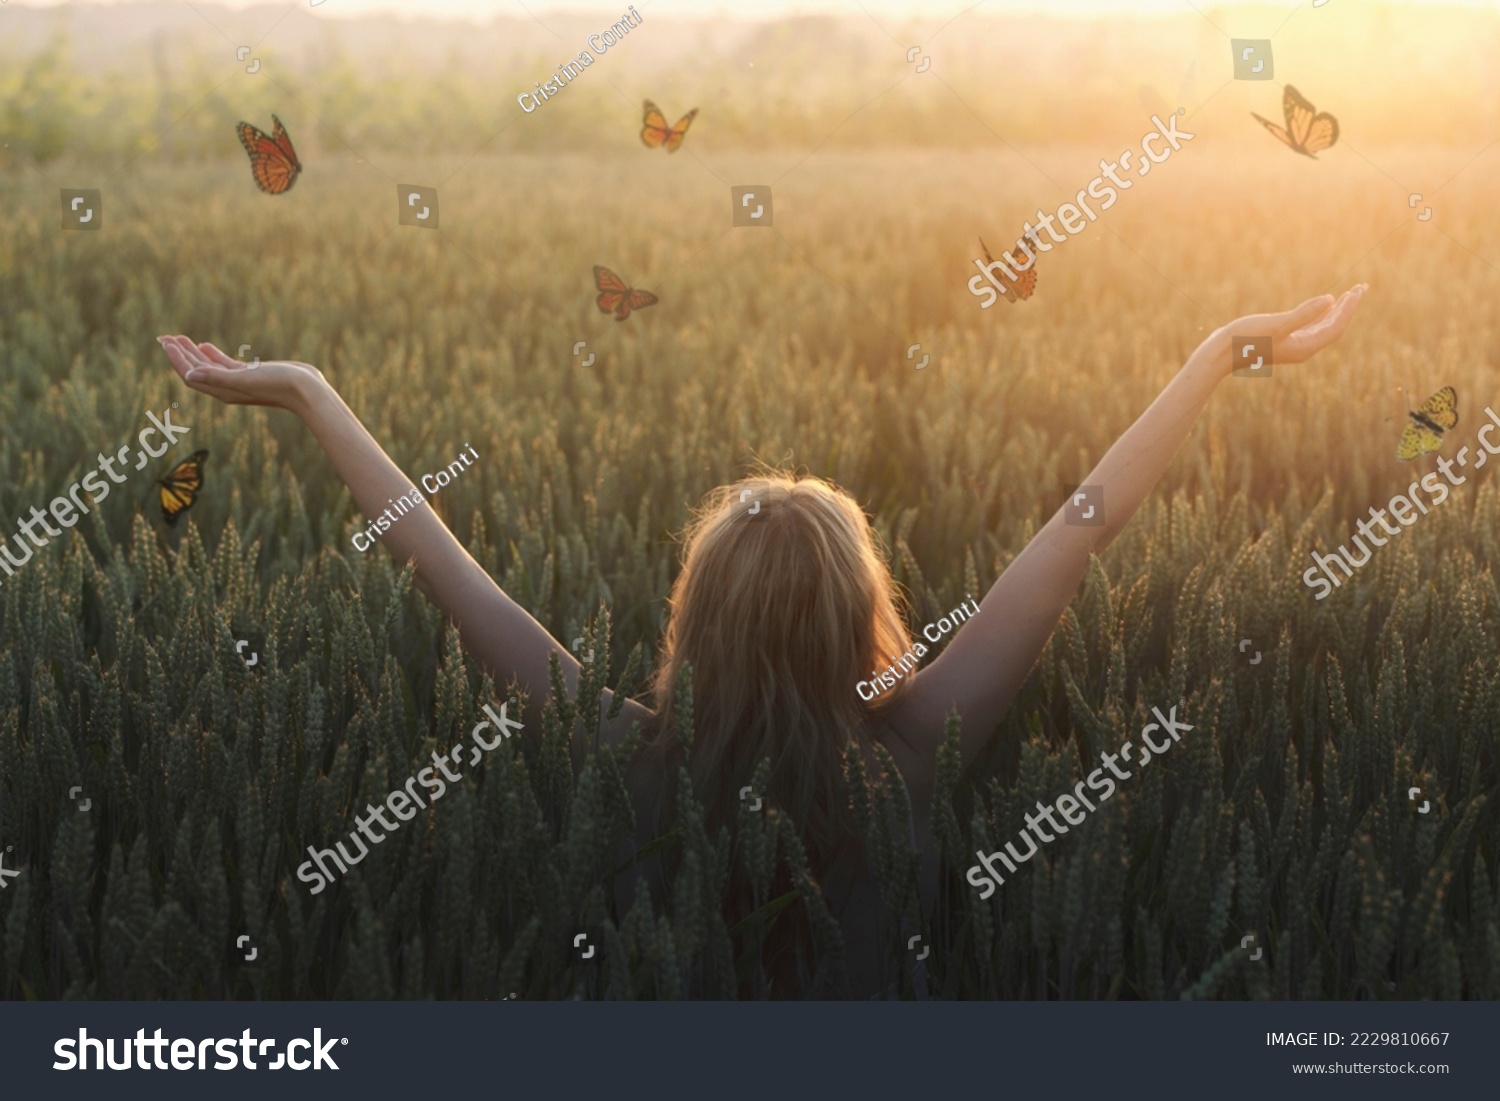 surreal encounter between a woman and free butterflies flying in the middle of nature #2229810667